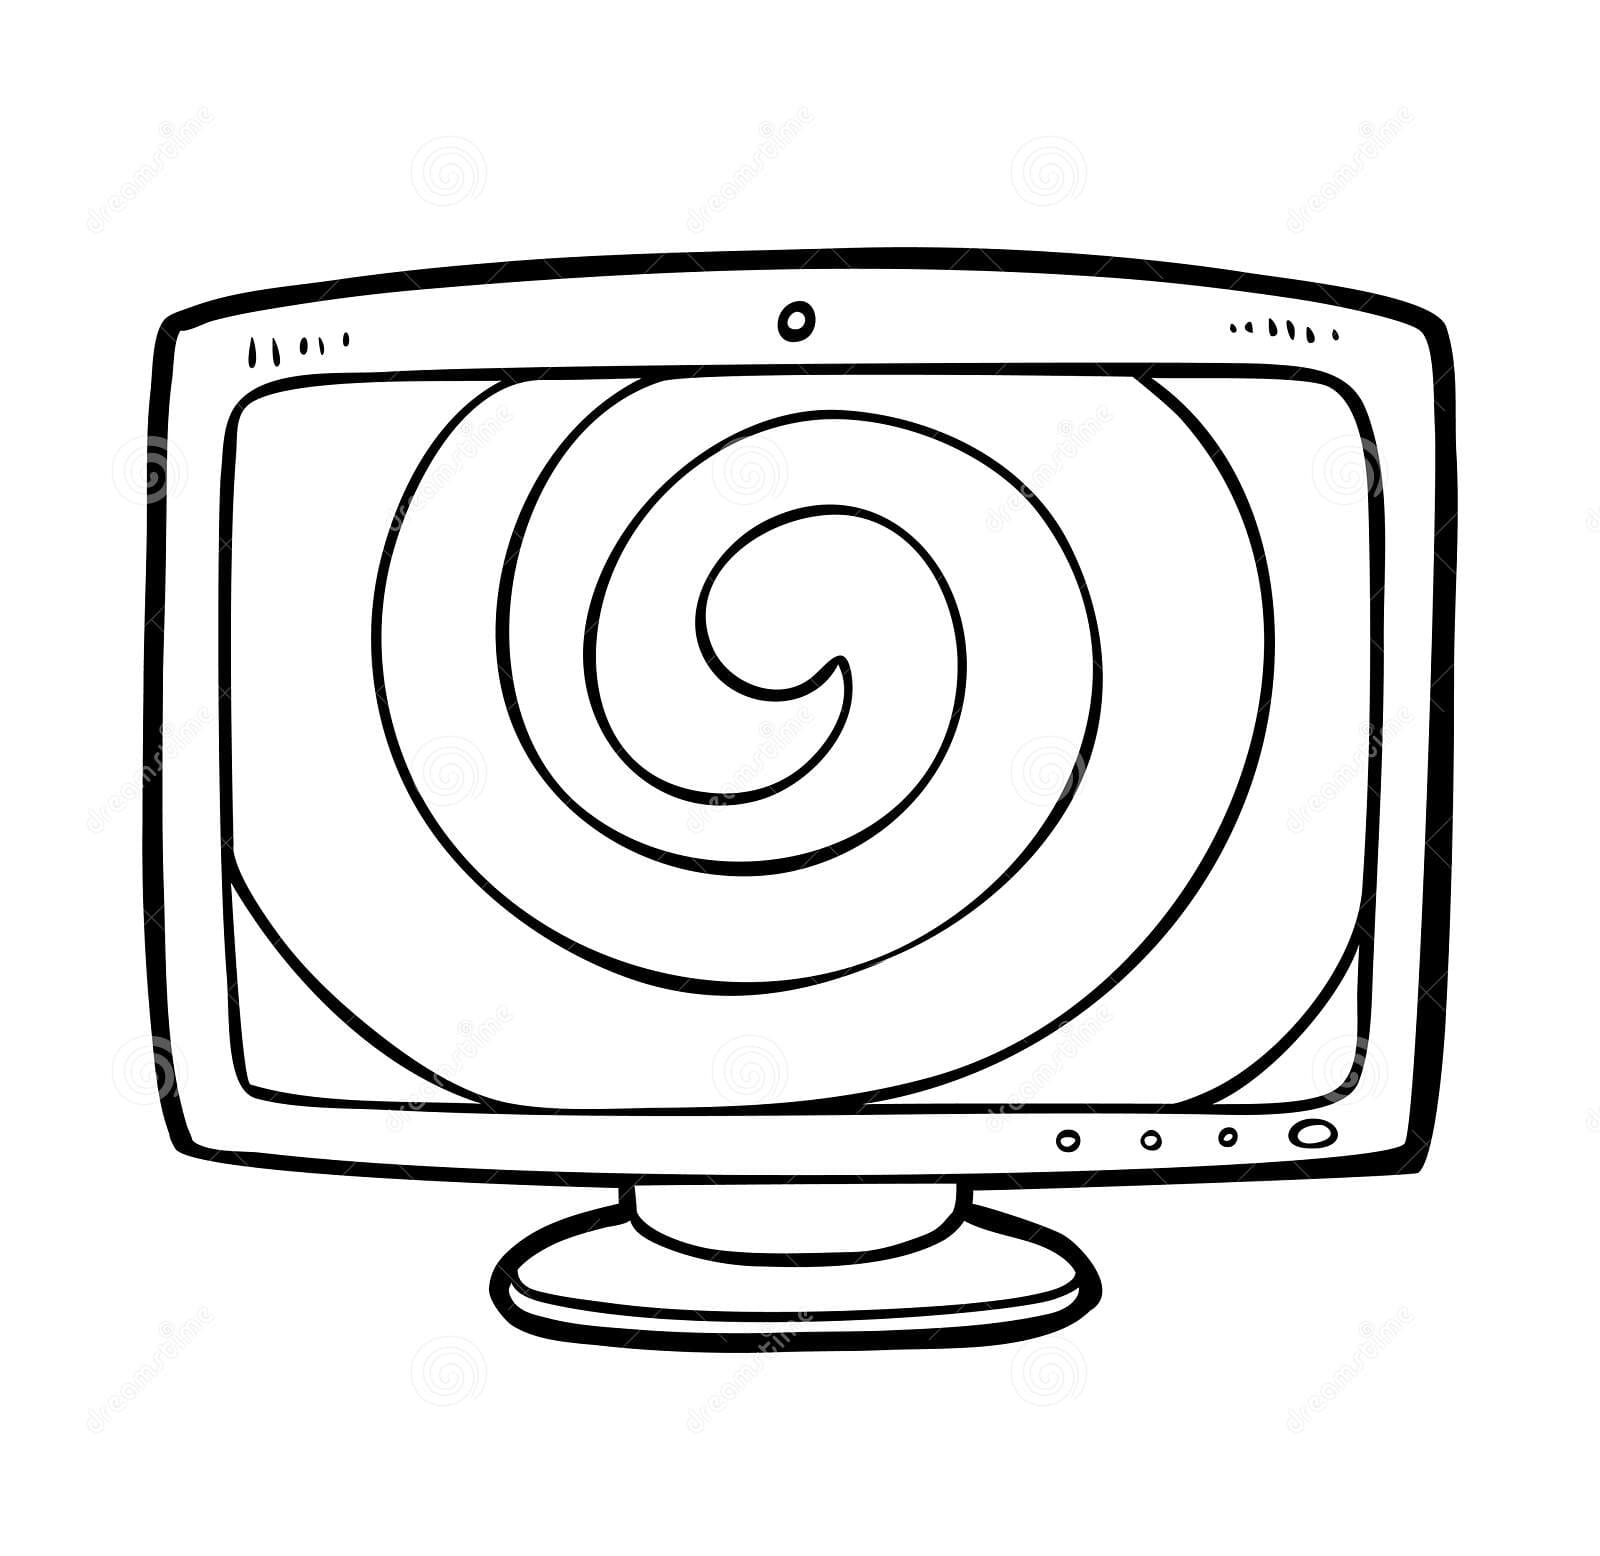 Coloring book, Computer monitor Coloring Page